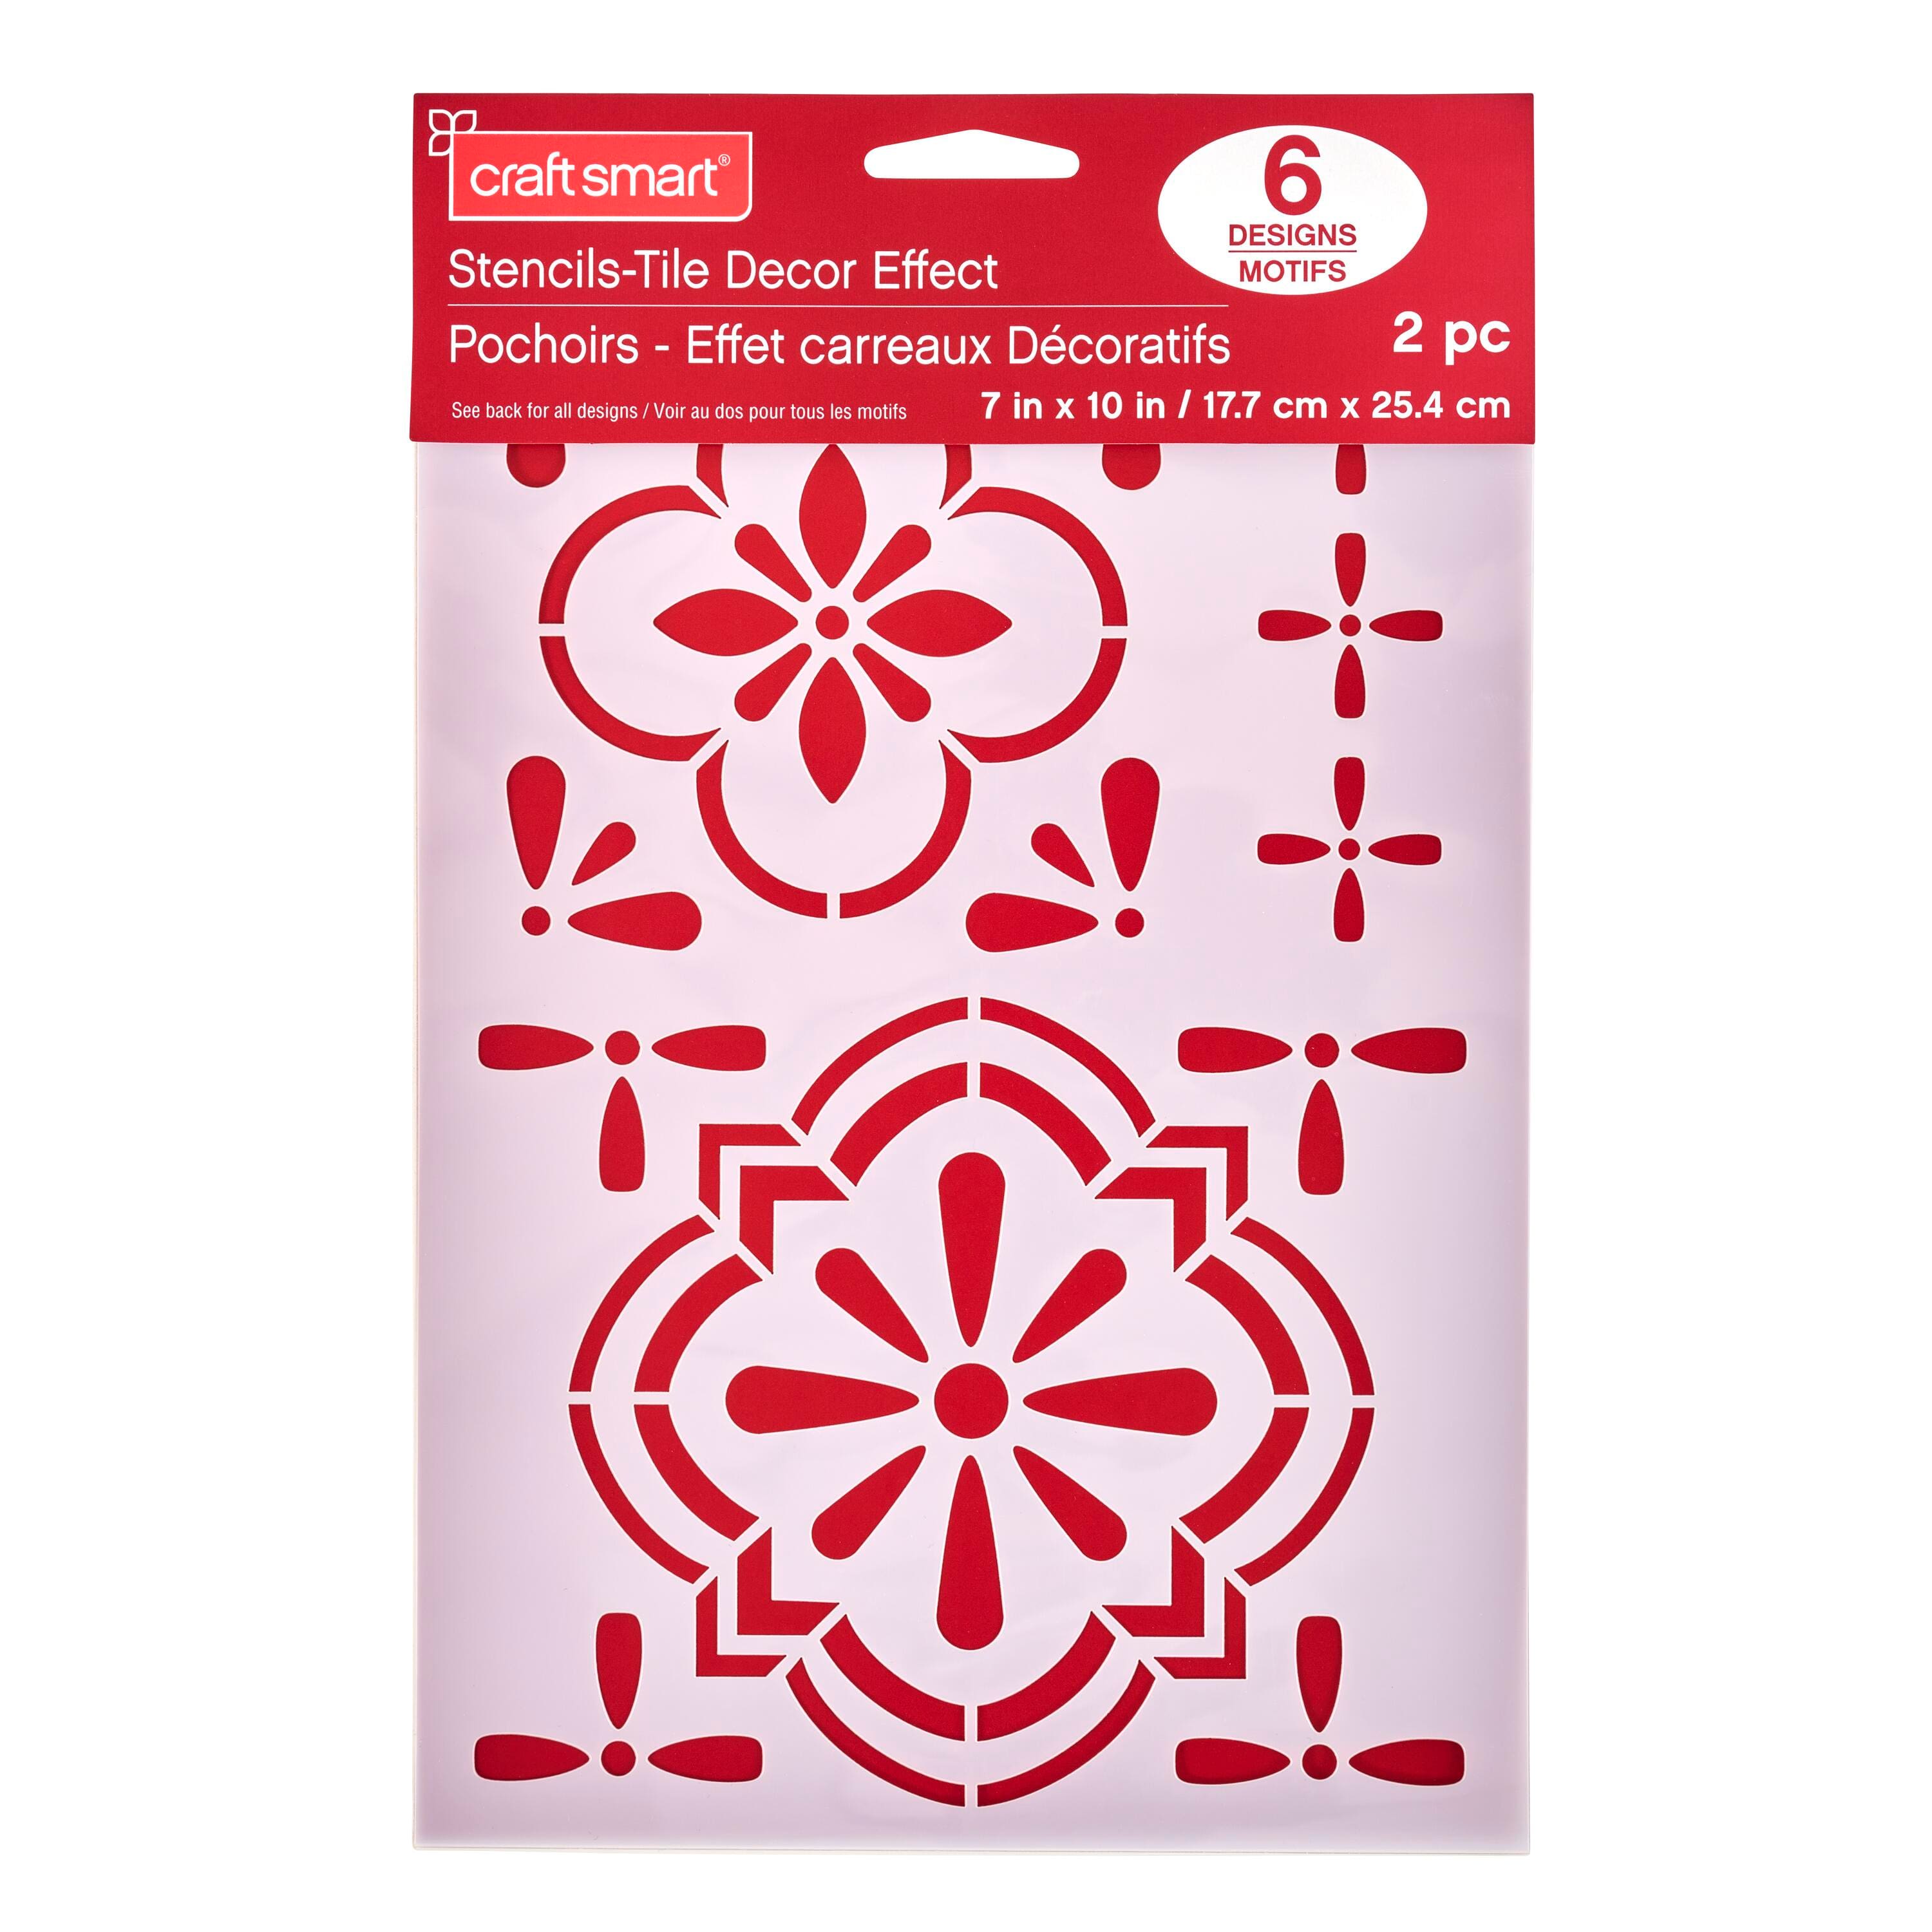 8 Pack 6 x 6 Inch Mandala Stencils, Reusable Painting Drawing Mandala  Stencils Template for Stones